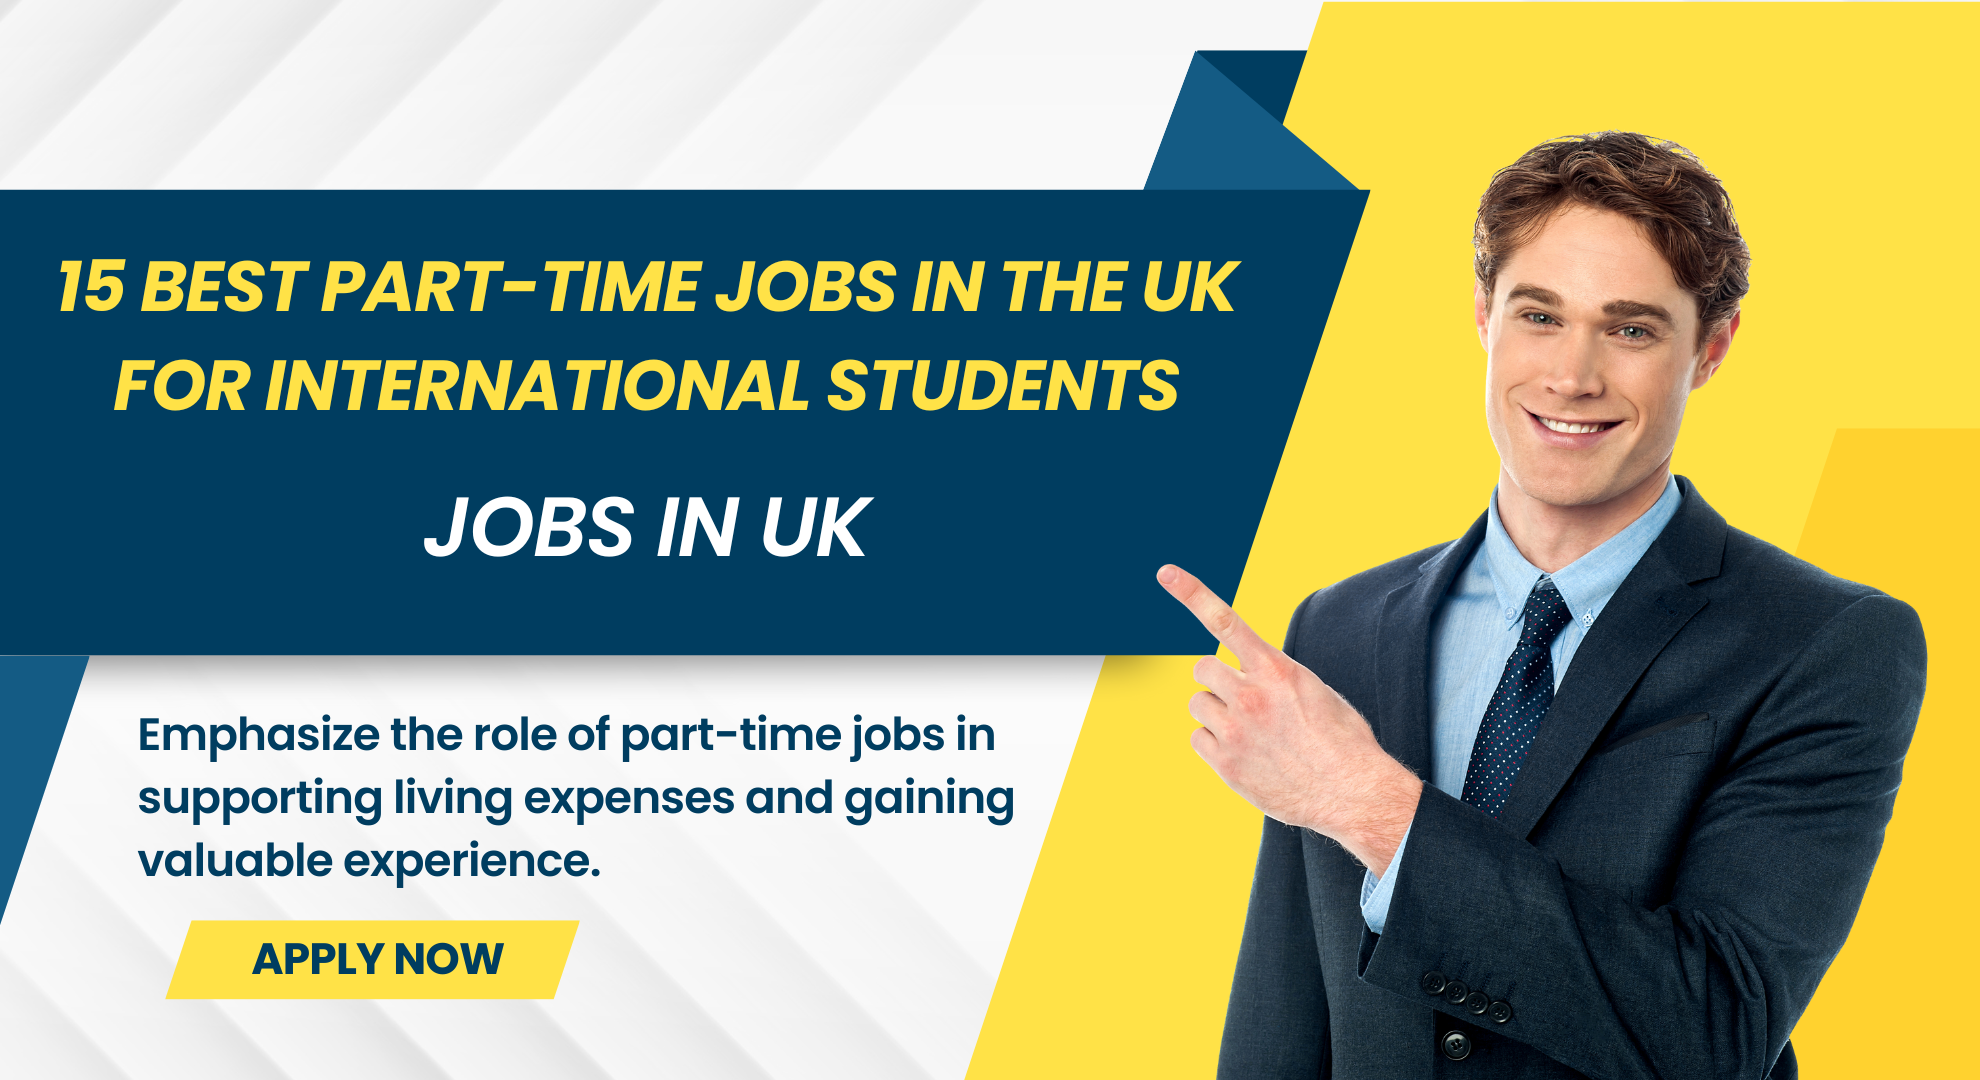 15 Best Part-Time Jobs in the UK for International Students